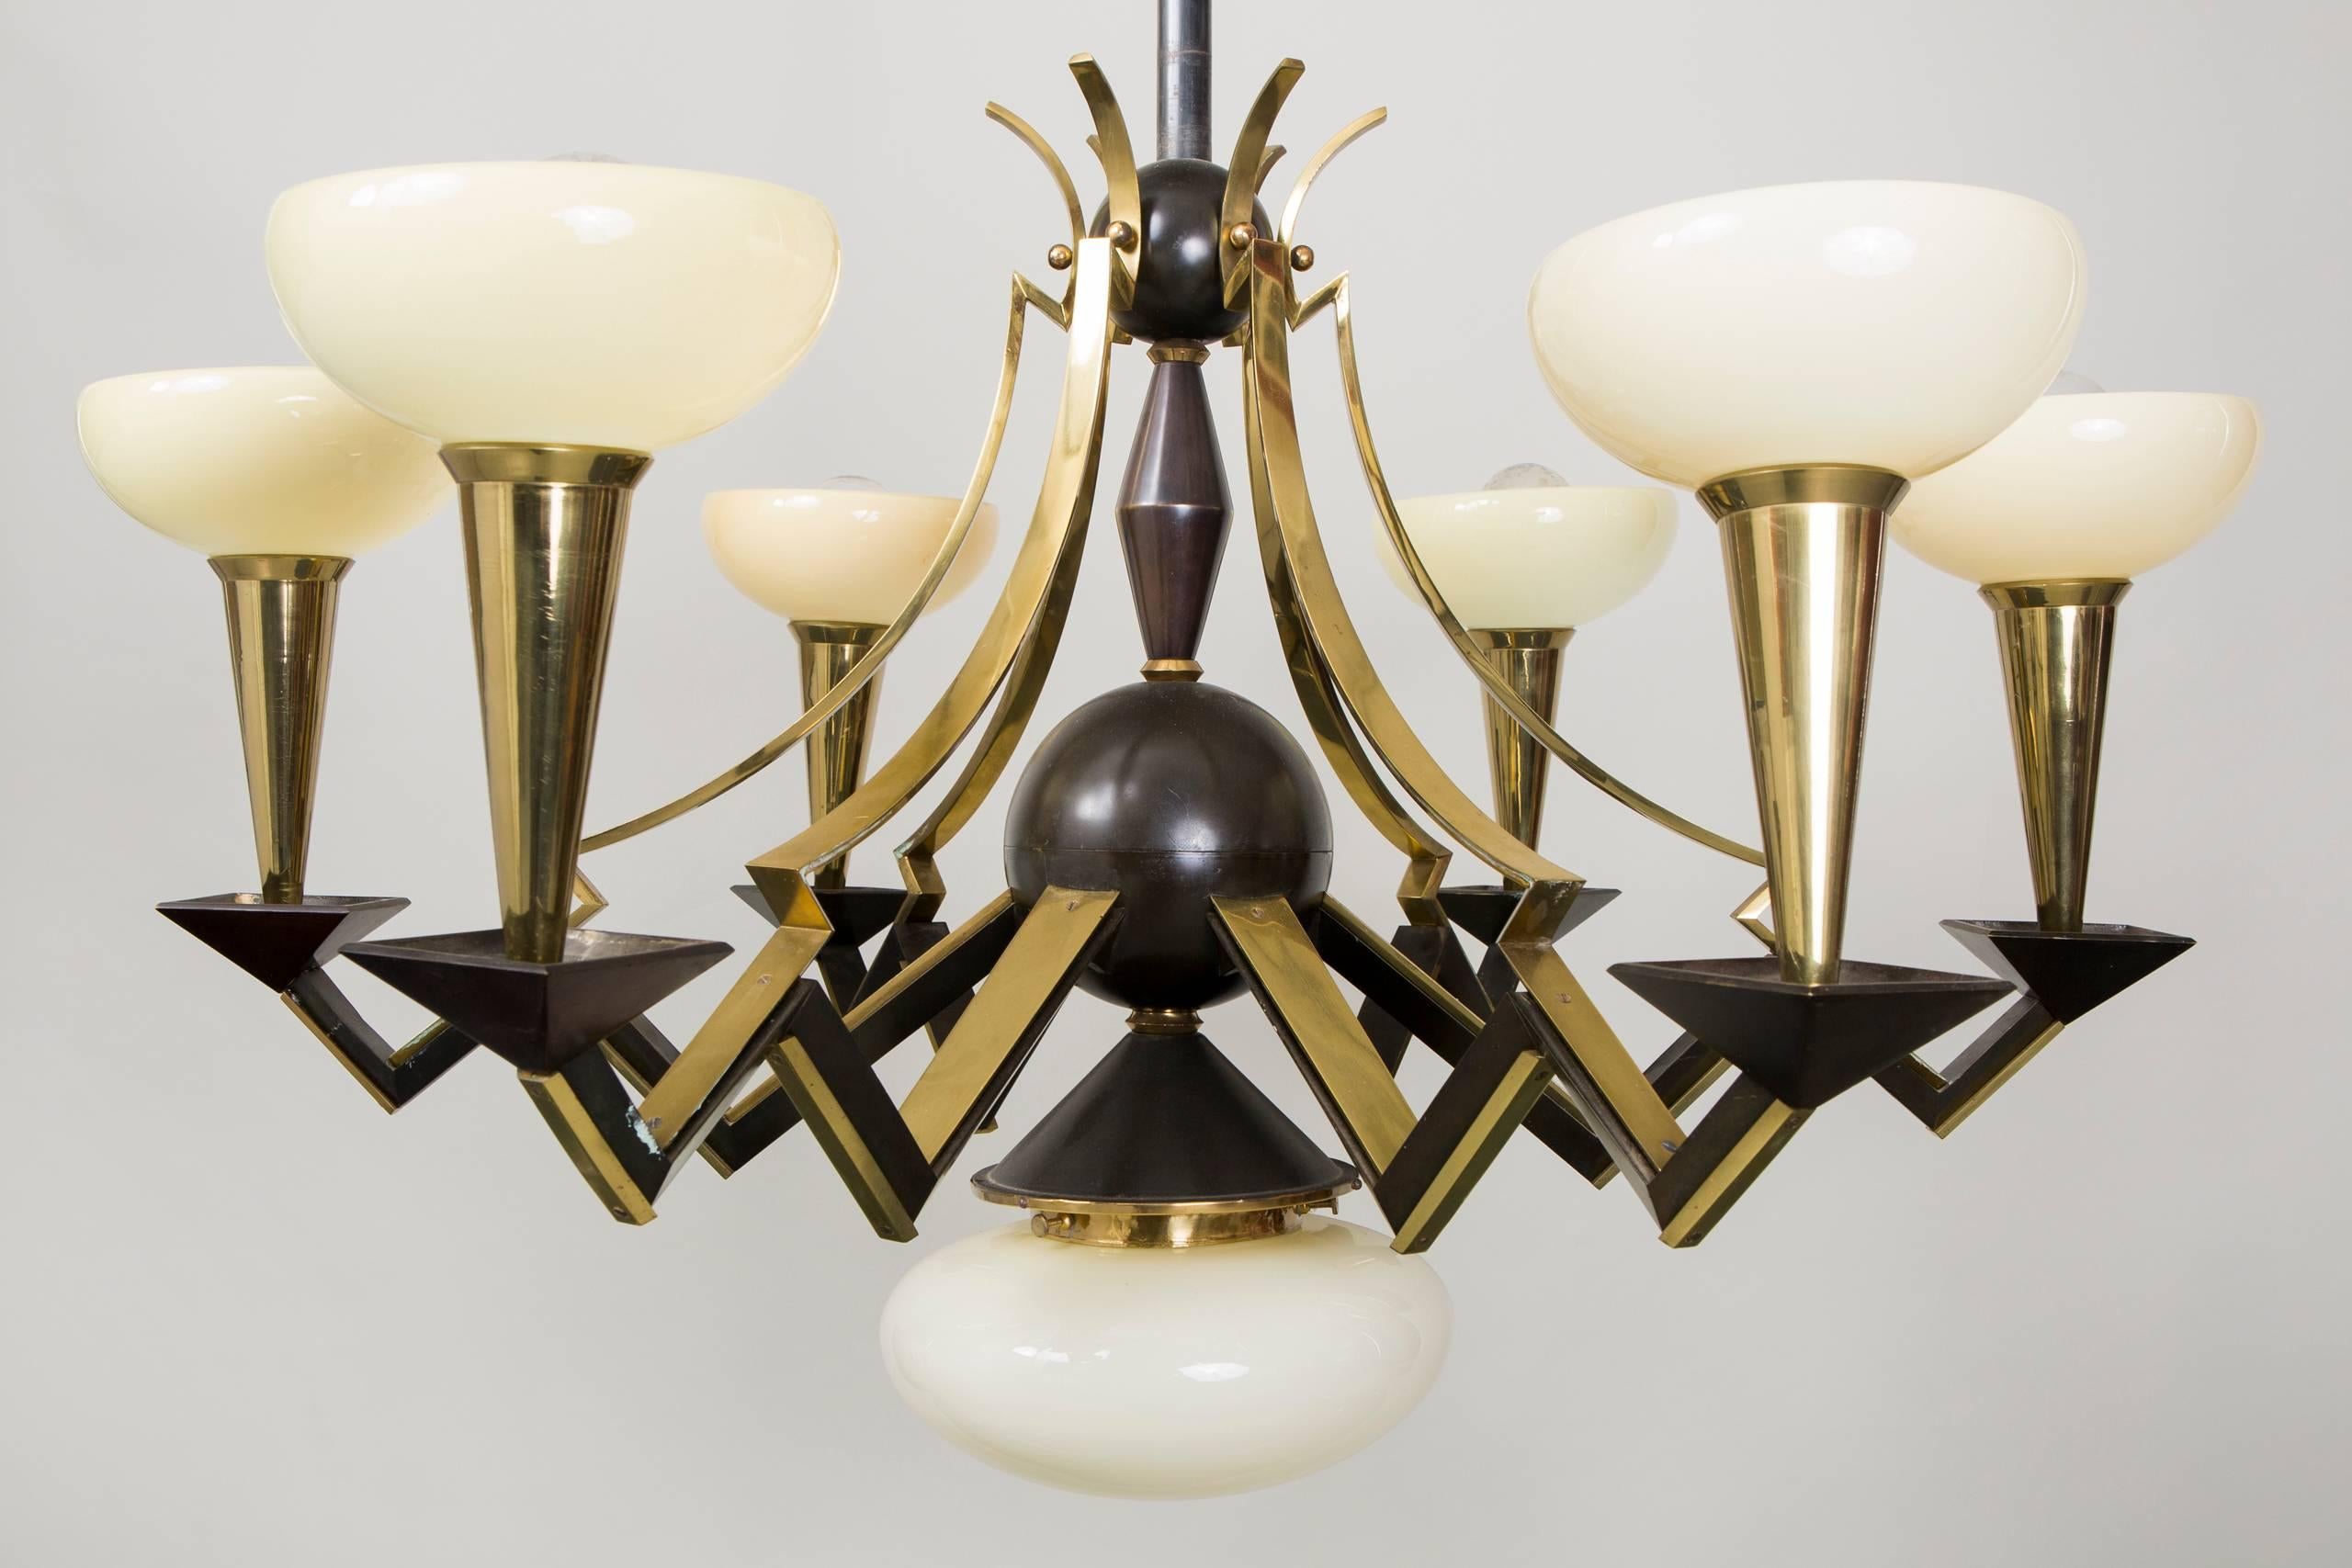 Cubist style chandelier by architect Josef Gočár.
Original perfect condition. No damages.
Rare design.

We guarantee safe a the cheapest air transport from Europe to the whole world within 7 days.
The price is the same as for ship transport but